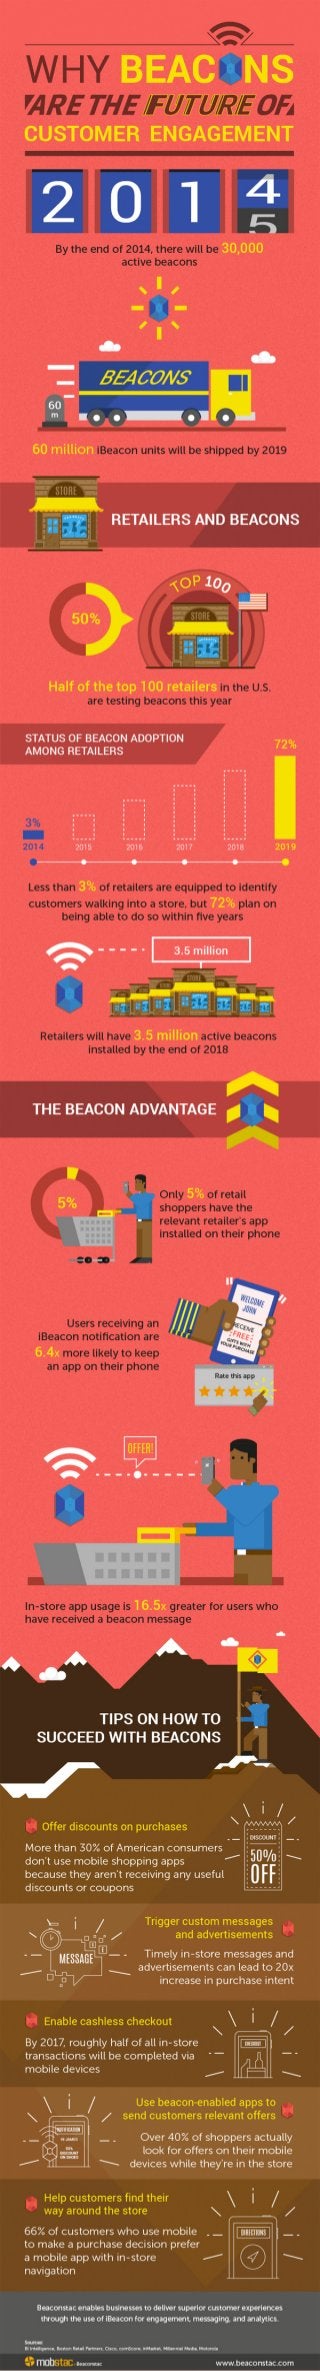 Why beacons are the future of customer engagement 